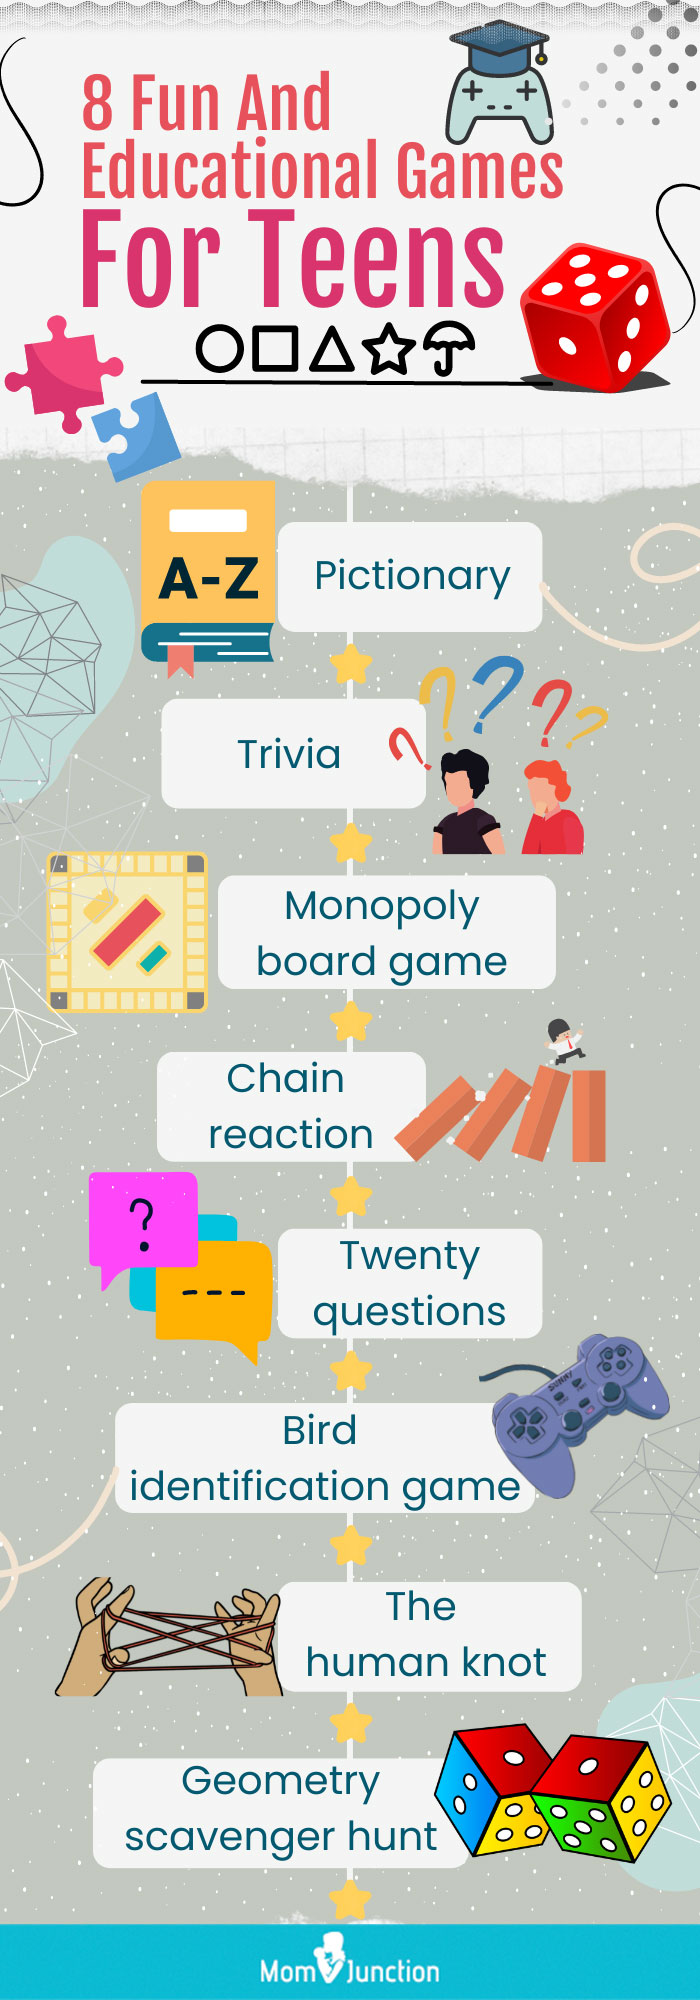 20 Fun Games for Classrooms (Plus Benefits and Examples)